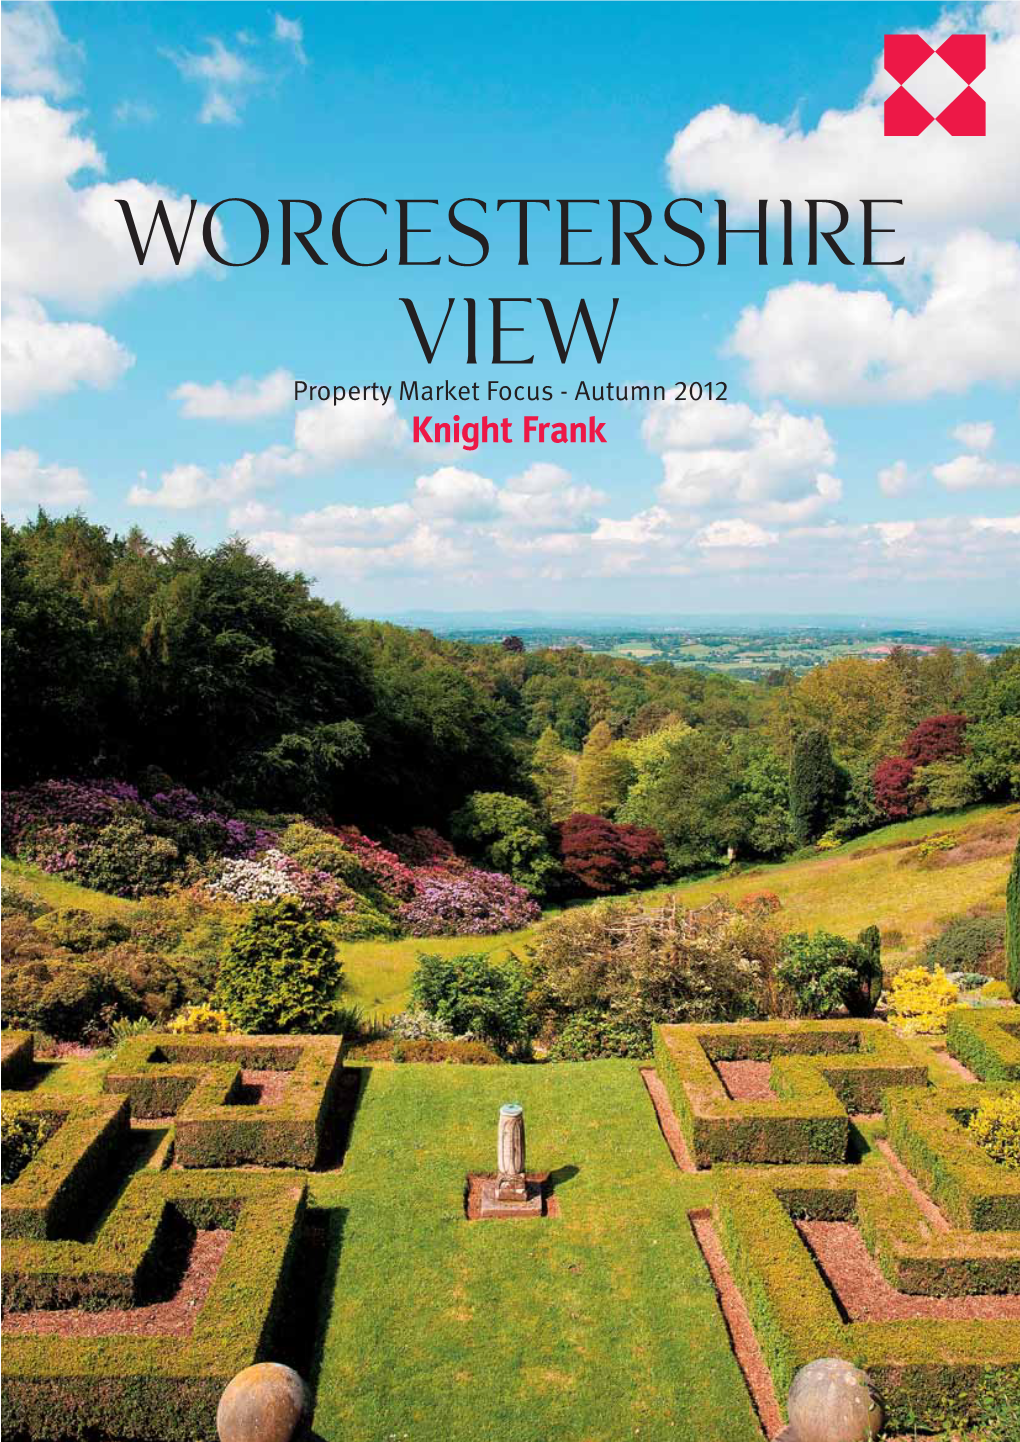 Worcestershire View Property Market Focus - Autumn 2012 2 Worcestershire View WELCOME